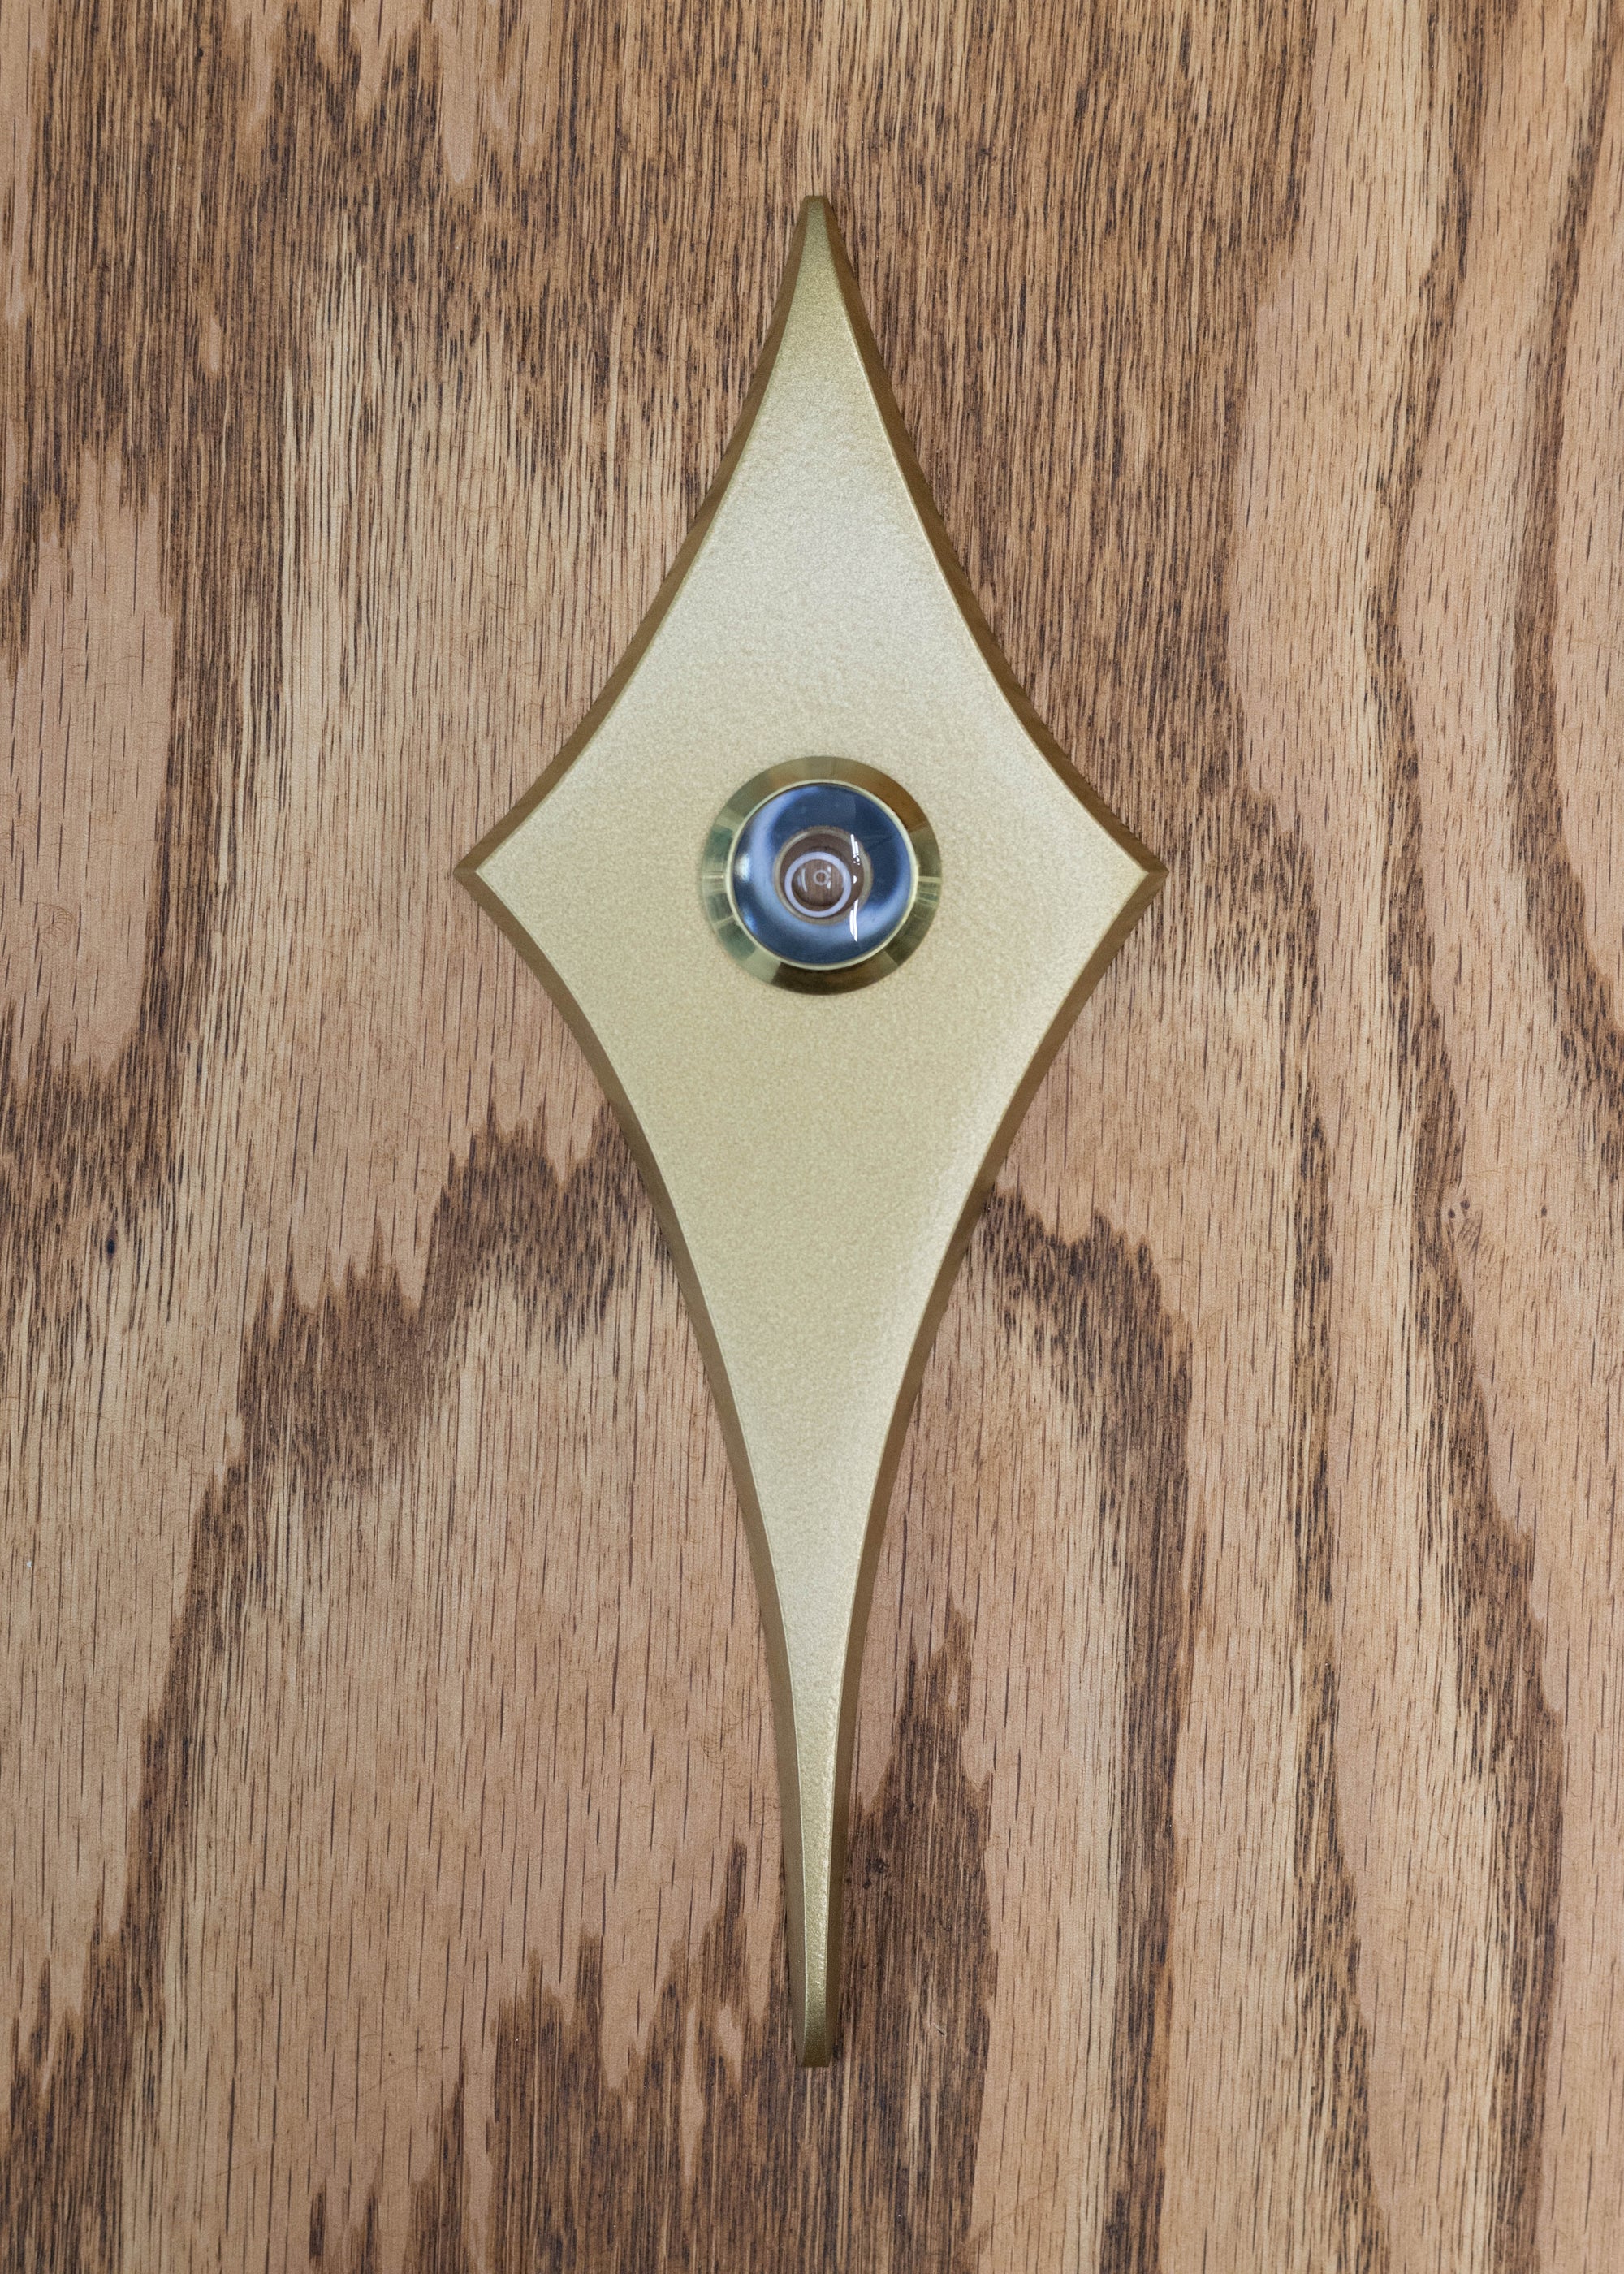 Gold coated comet peephole. The gold is very smooth and has a metallic shine to it, but is not as glossy as the silver. The peephole viewer has a gold rim.